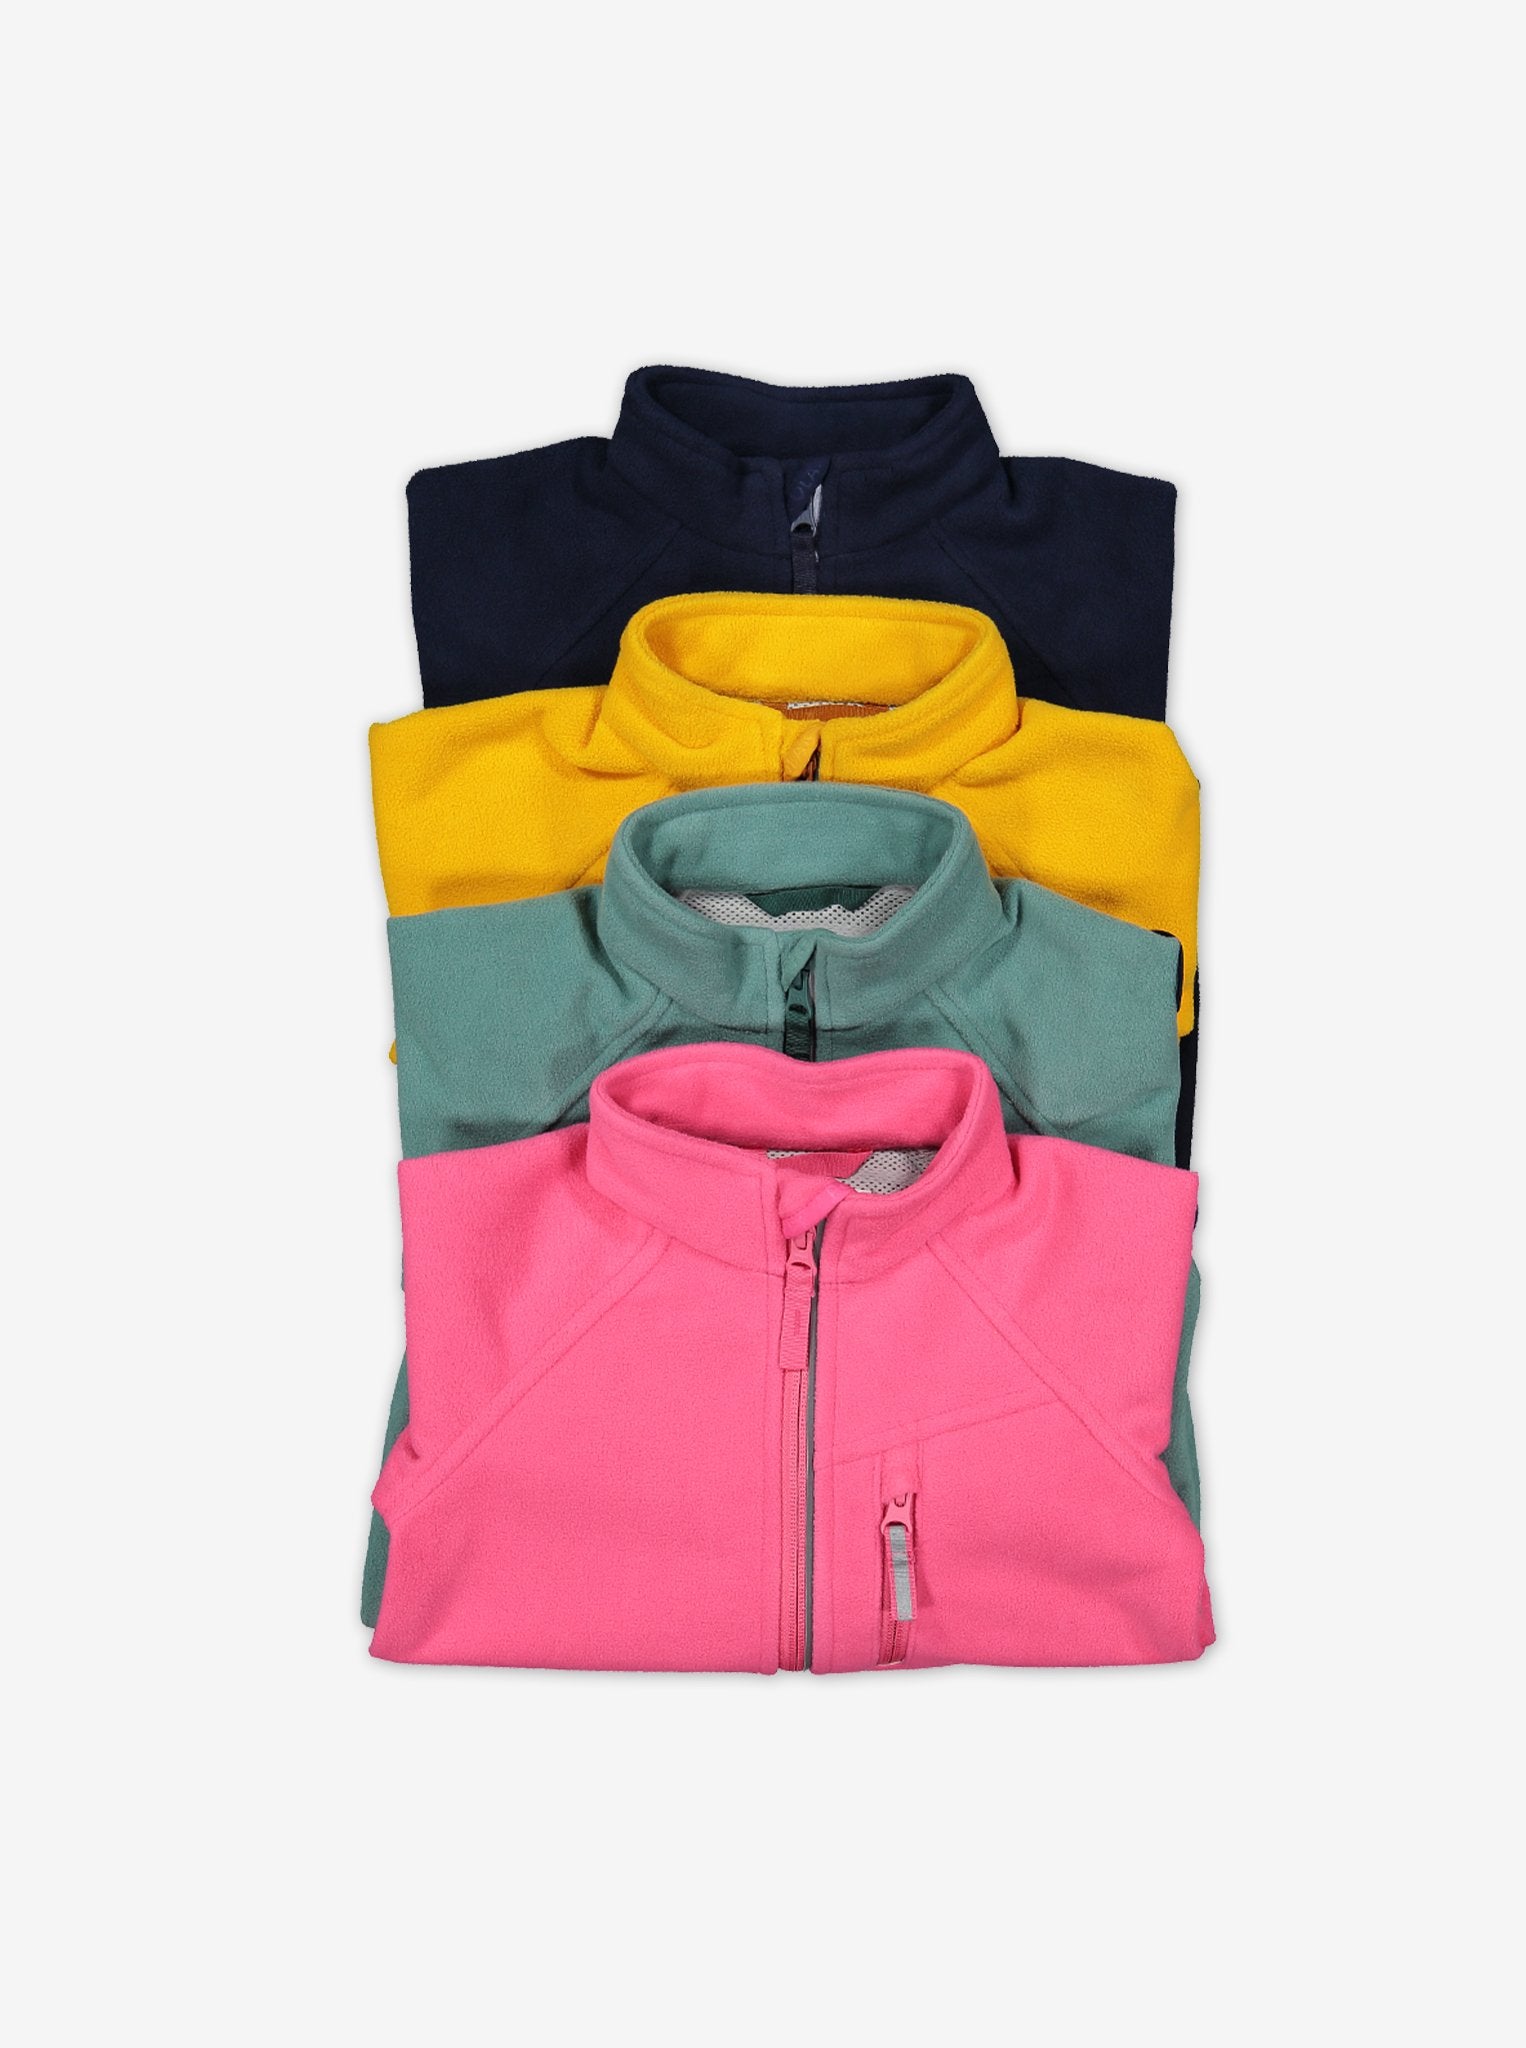 Set of 4 kids waterproof fleece jacket in navy, yellow, green, and pink, with reflectors on zips, made of 100% polyester.